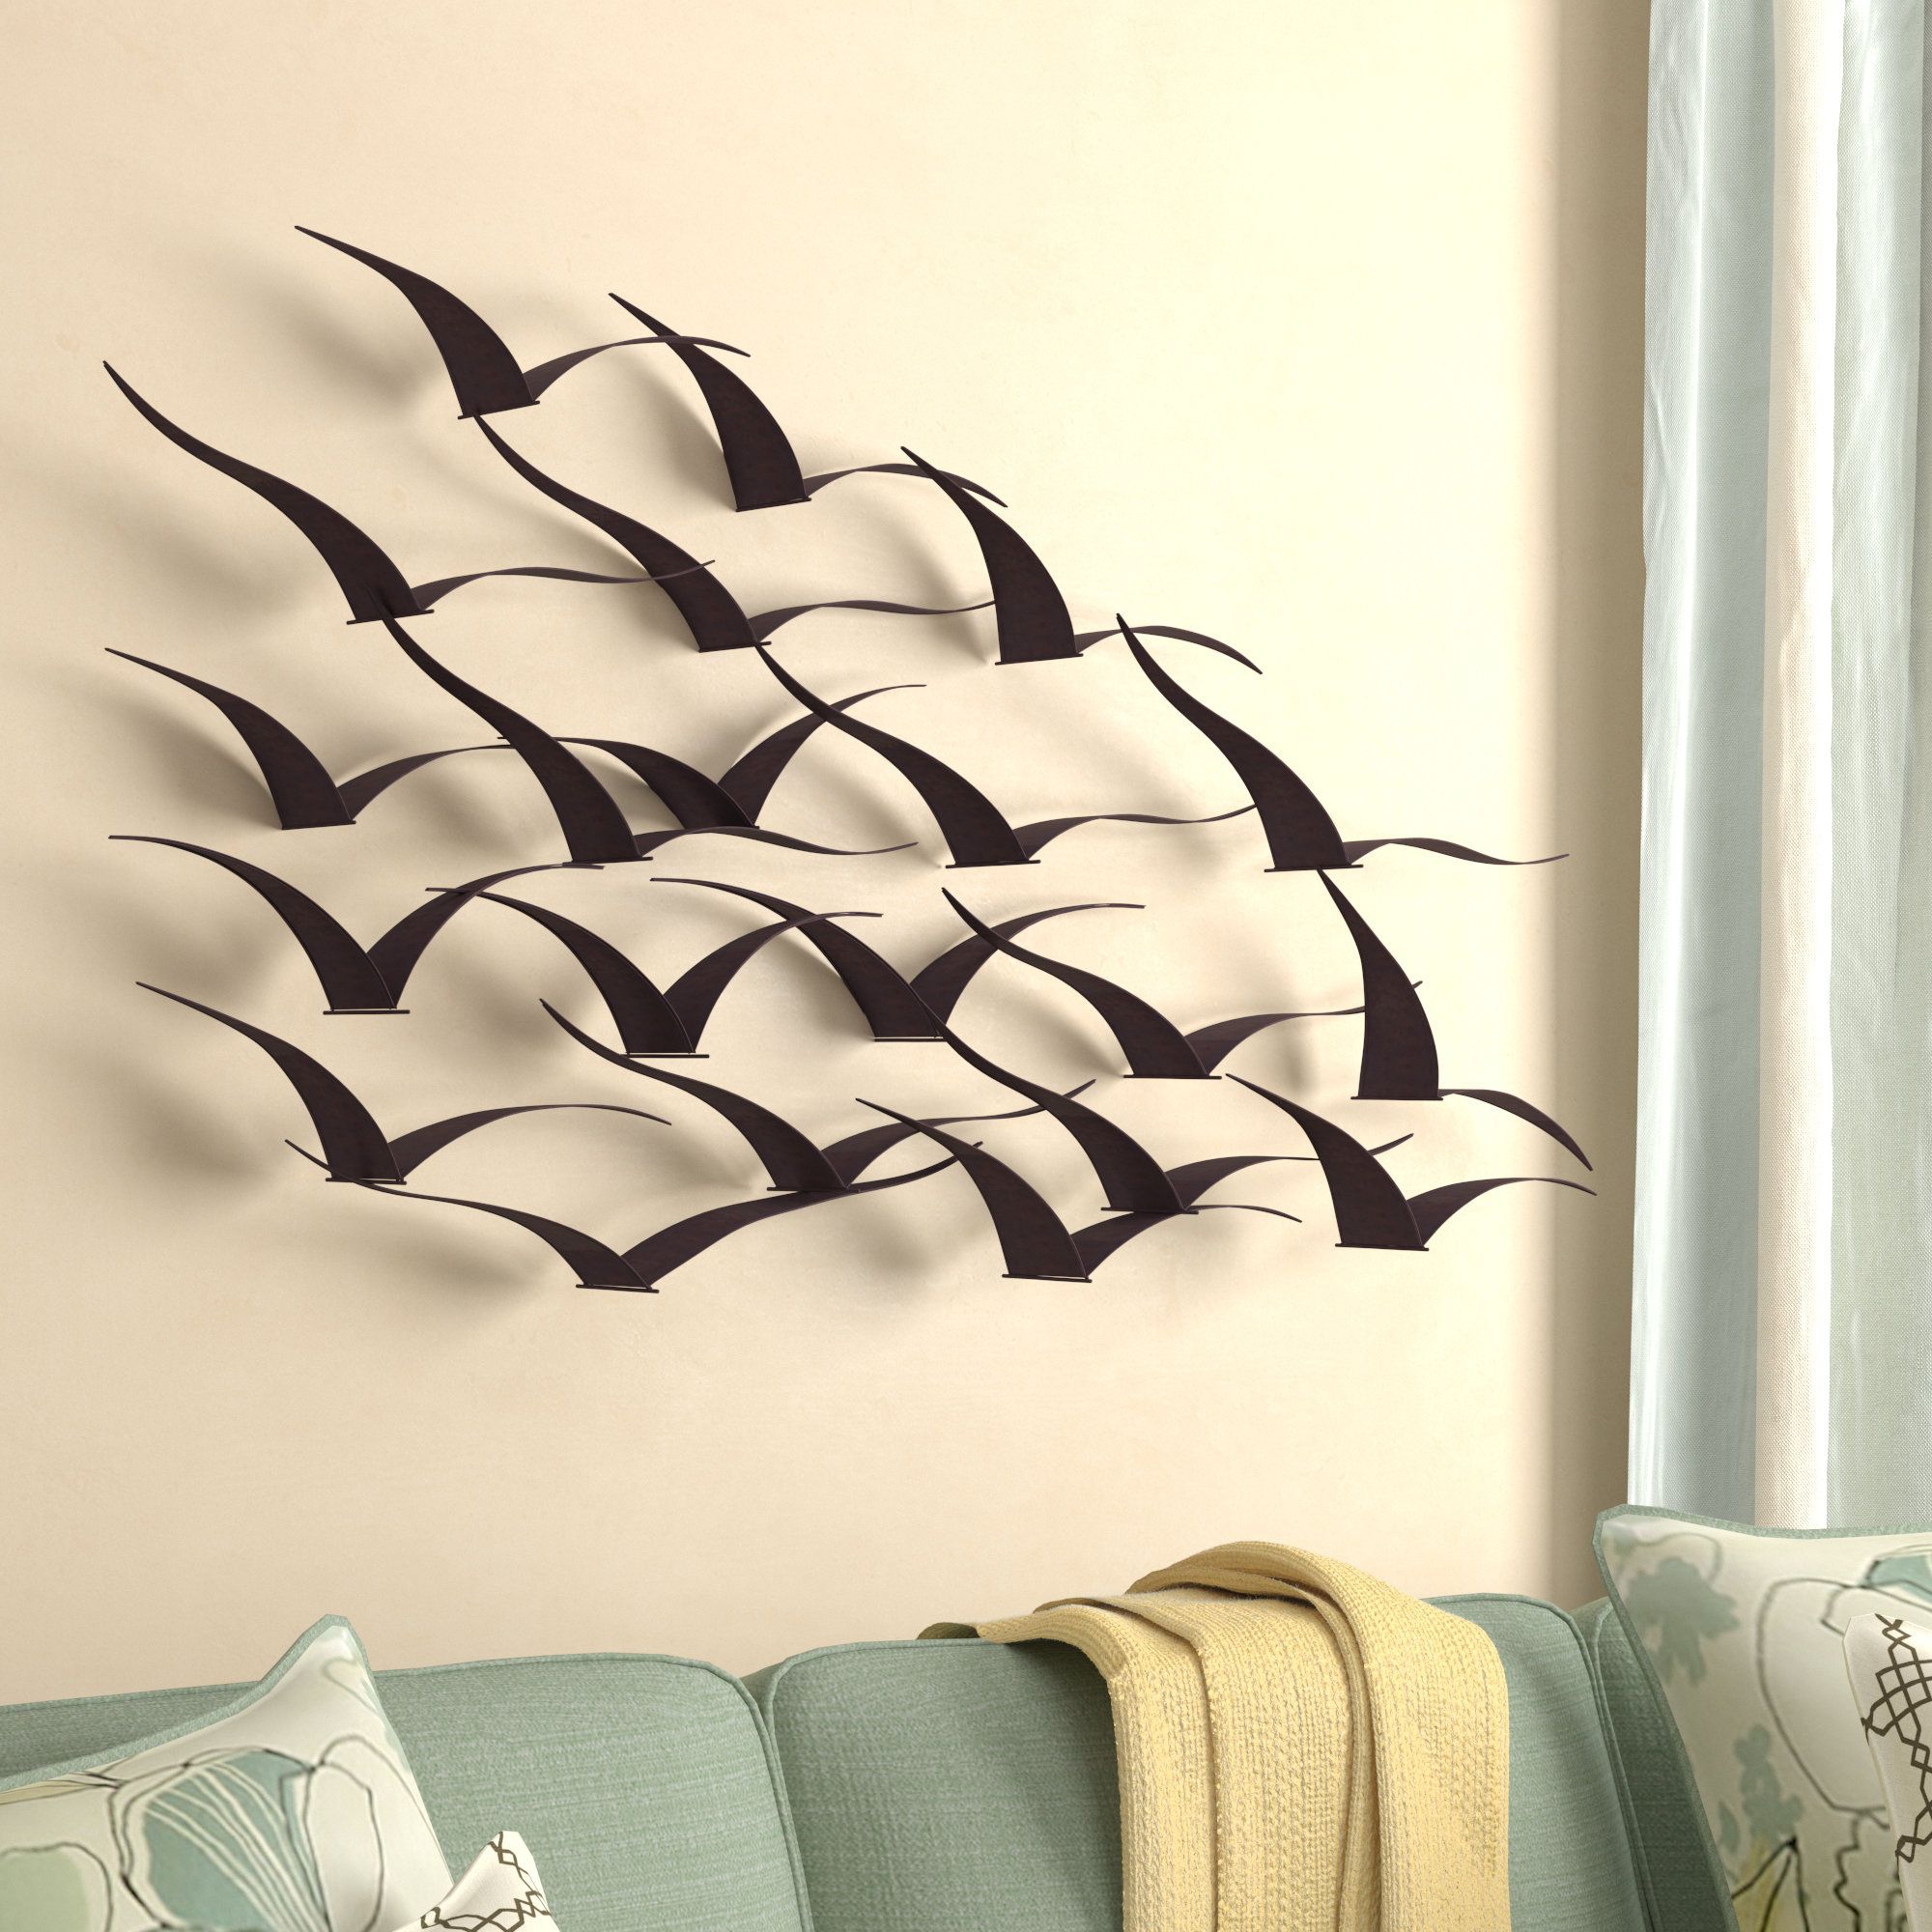 Metal Bird Wall Decor You'Ll Love In 2021 – Visualhunt Throughout Wooden Blocks Metal Wall Art (View 6 of 15)